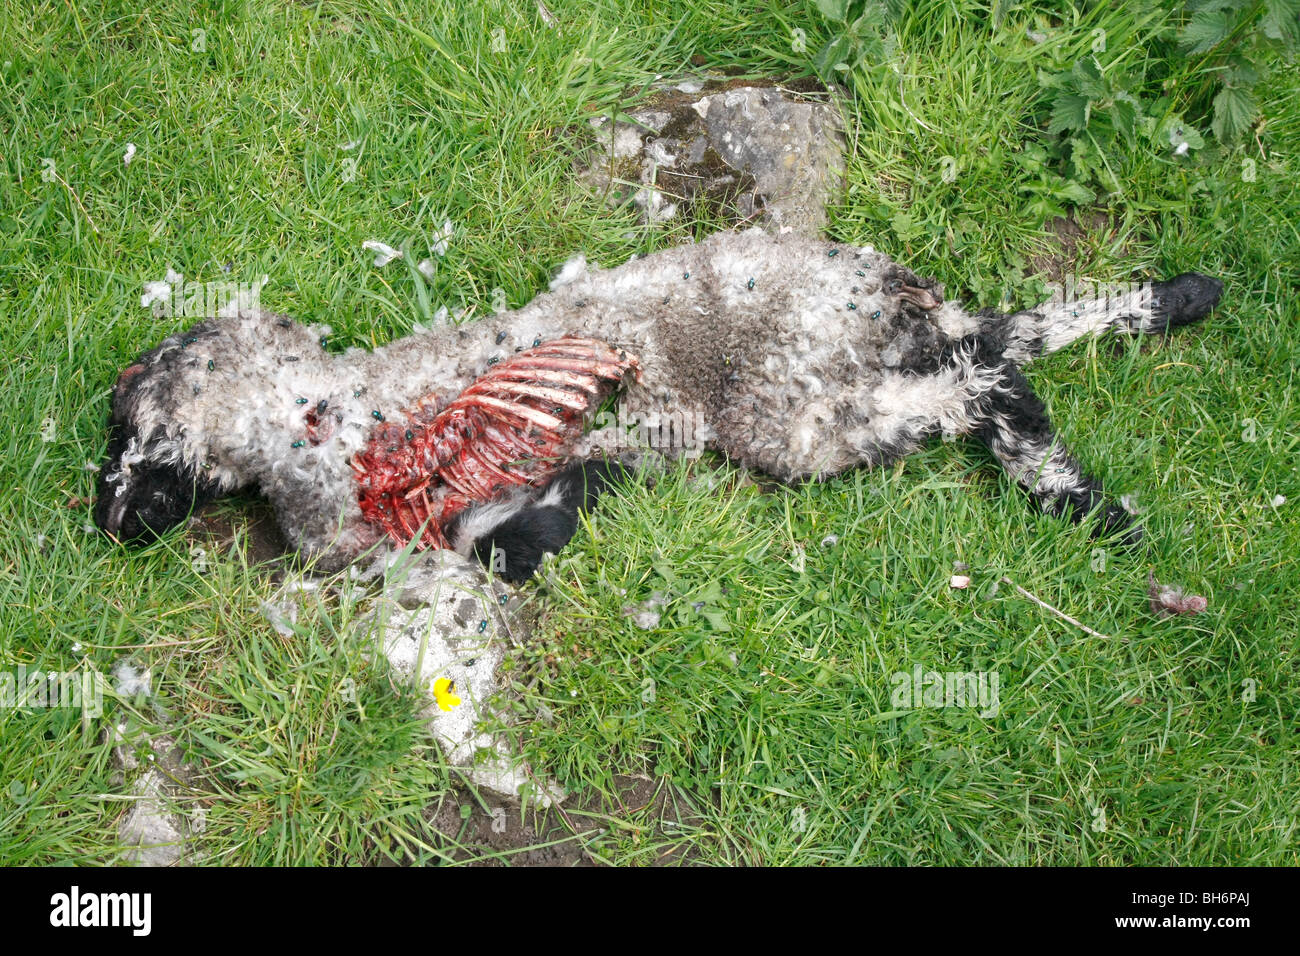 A dead sheep carcass in a field in the Derbyshire Peak District, UK Stock Photo